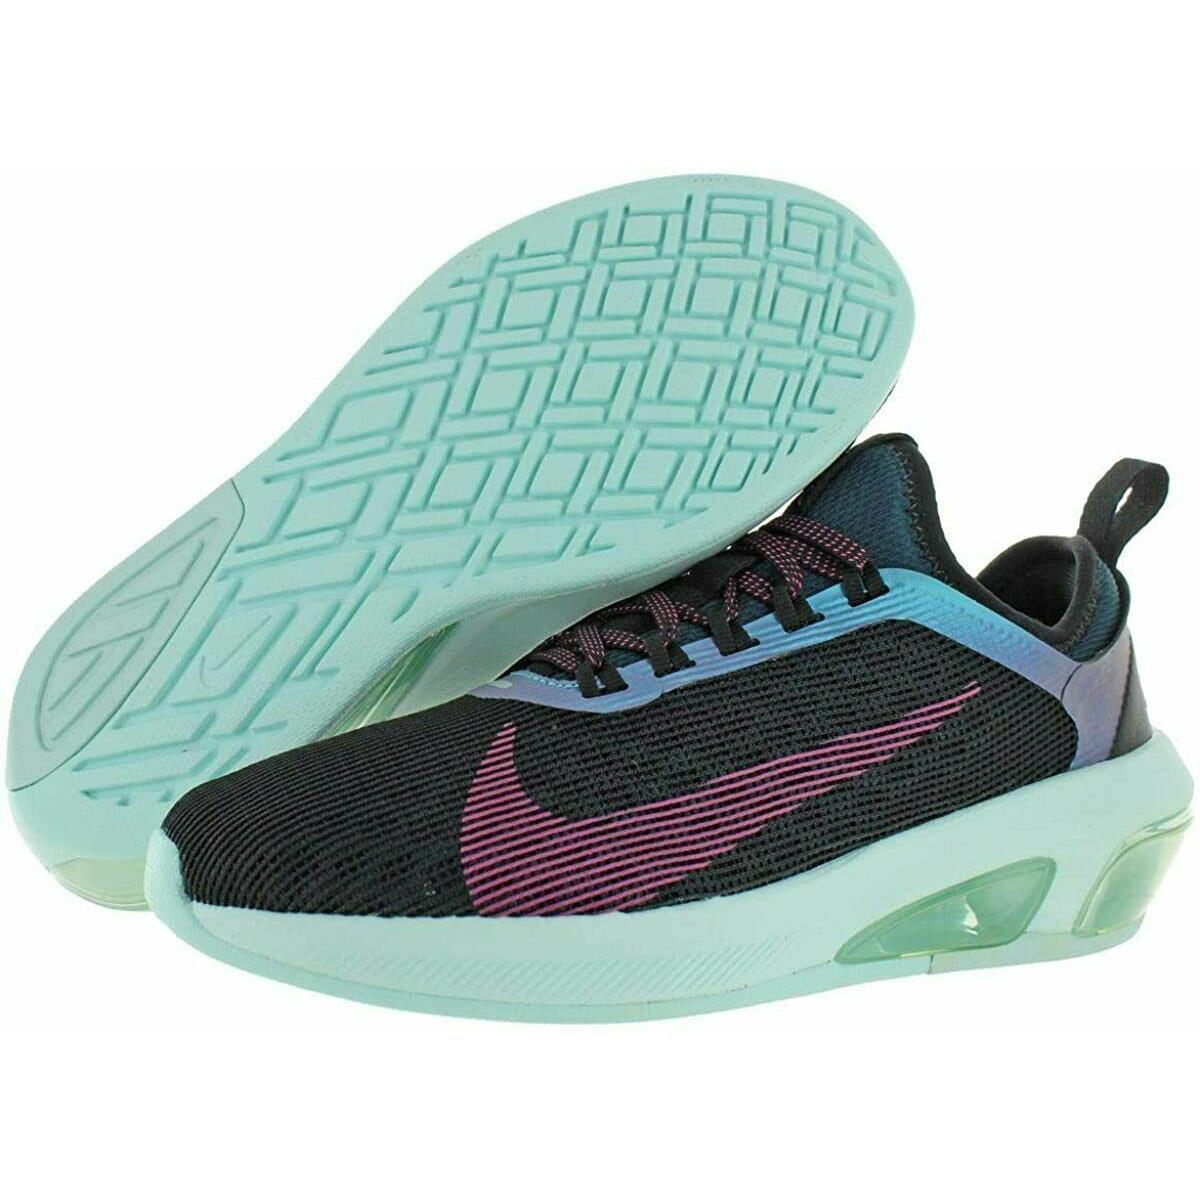 Wmns Nike Women`s Air Max Fly Running Shoe AT2505 001 Size 6 in The Box - Black/Laser Fuchsia-Teal Tint